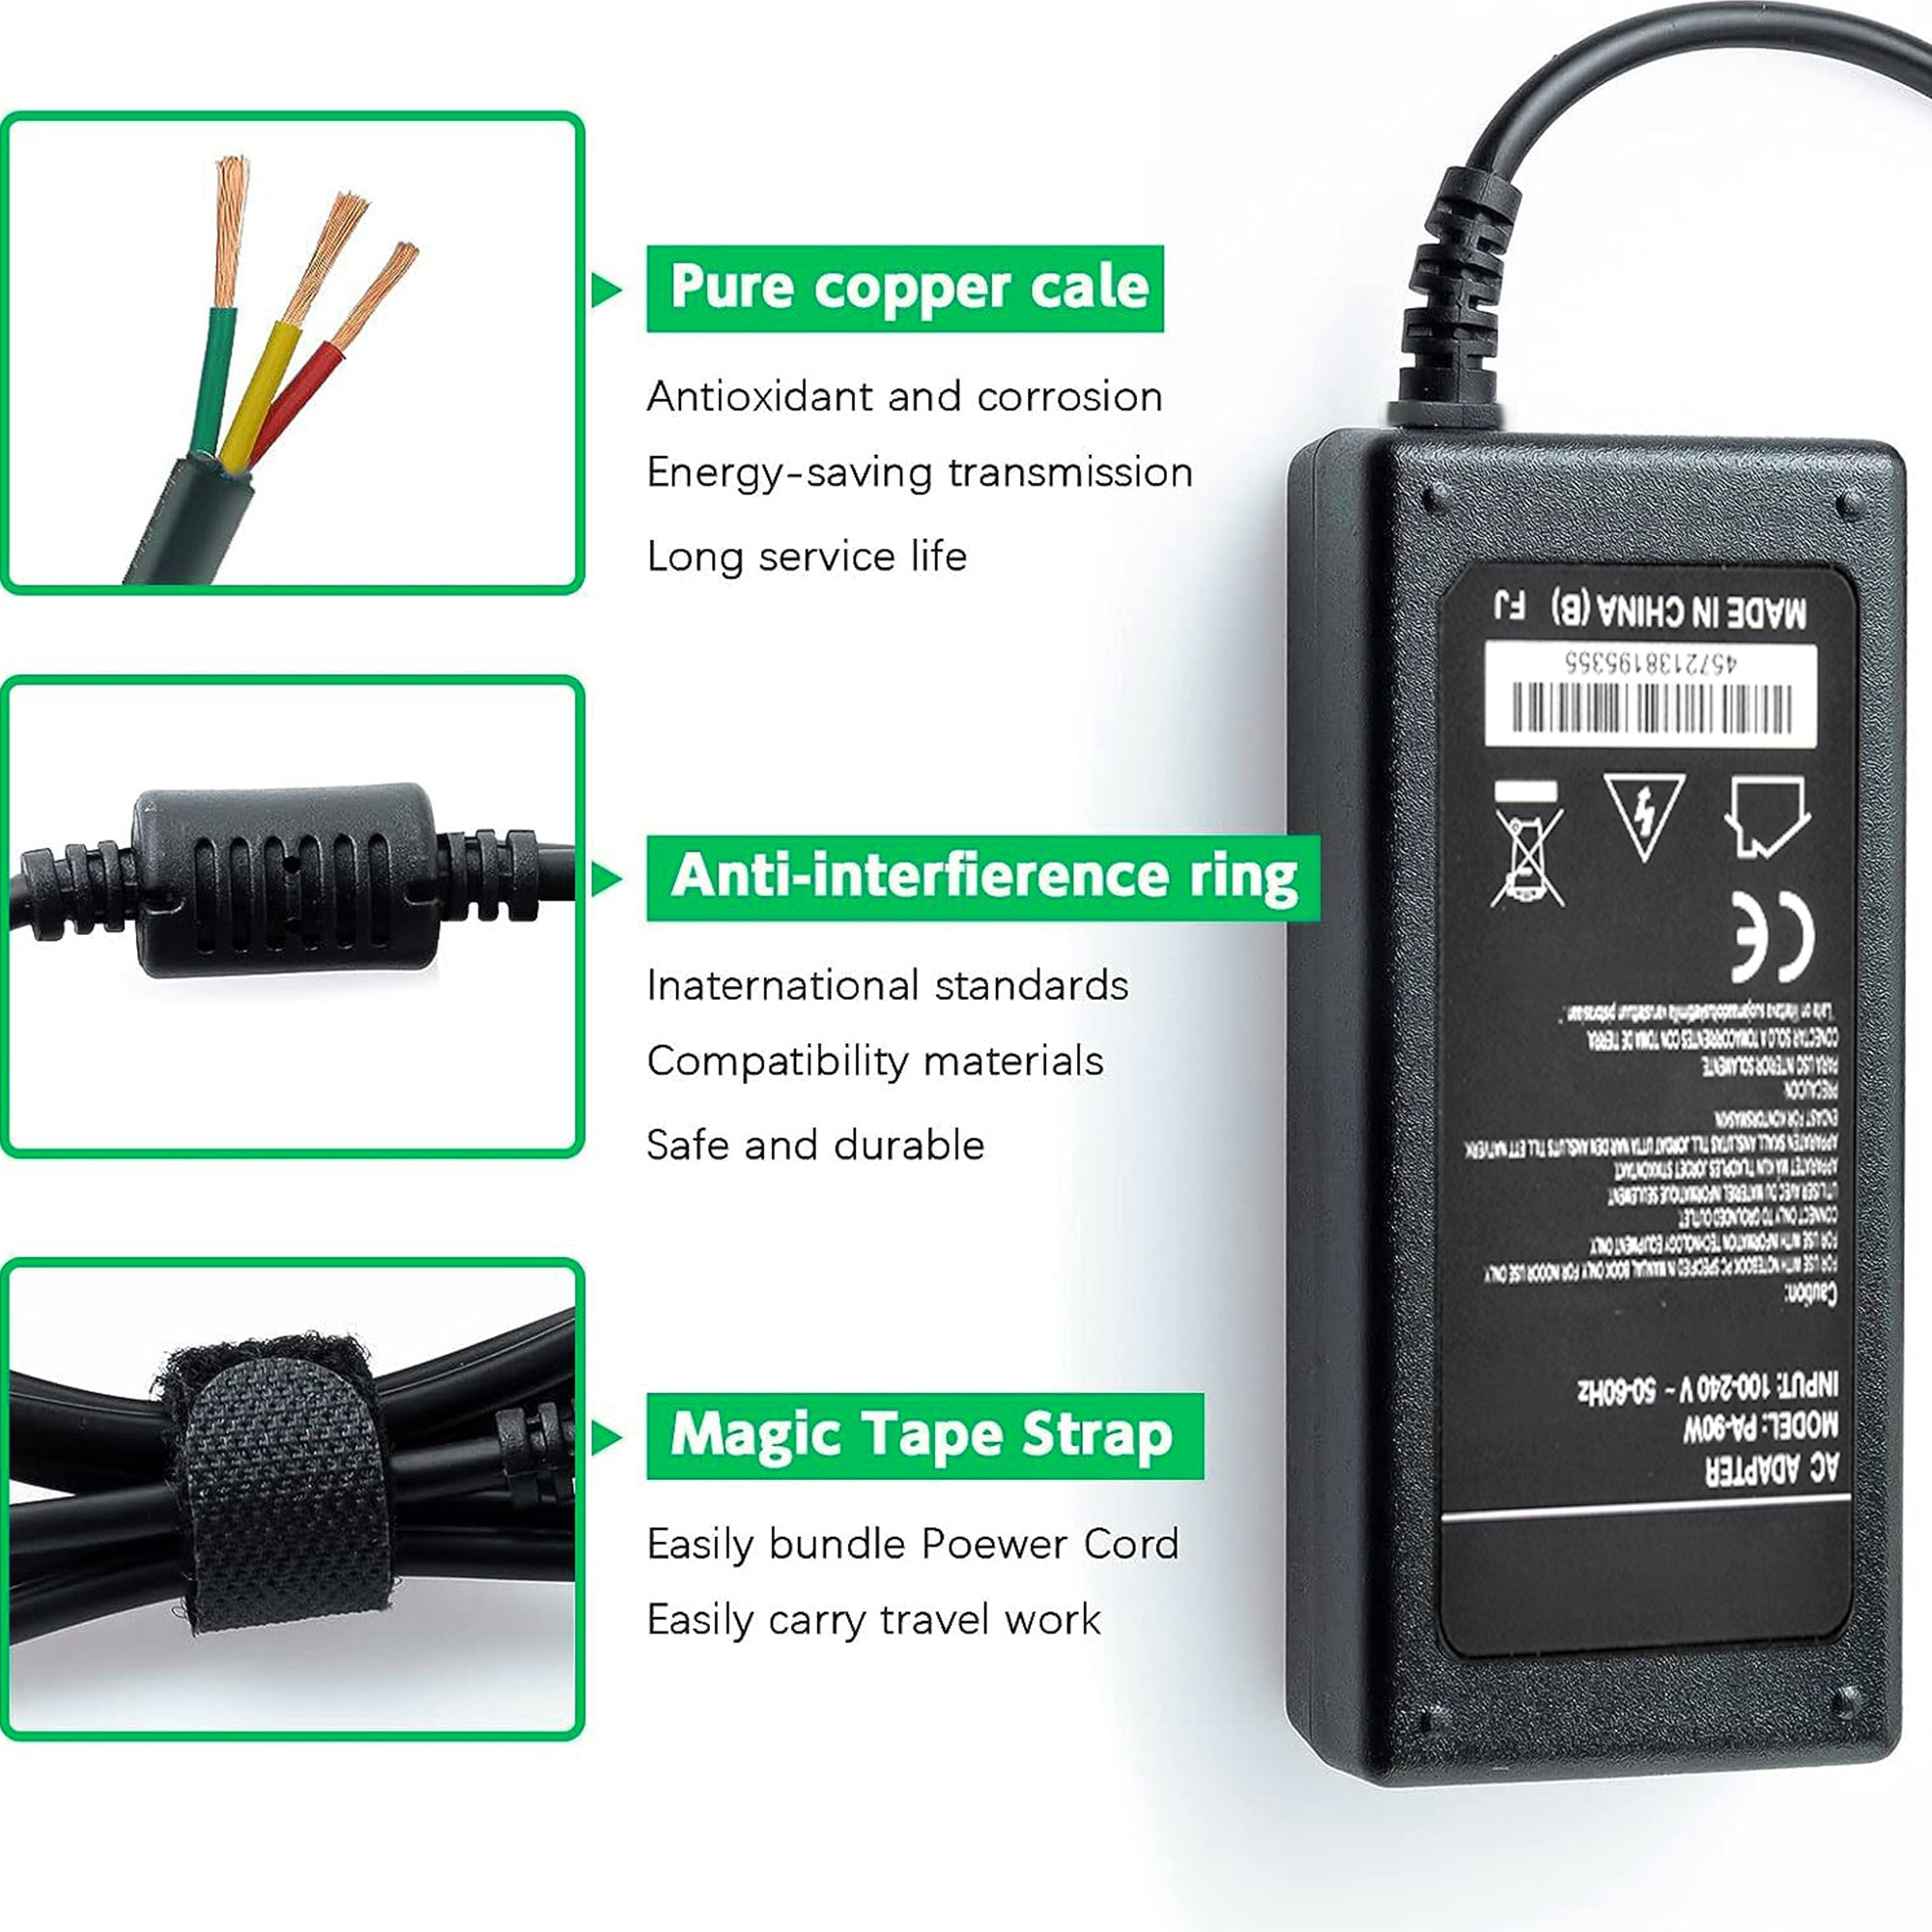 AbleGrid  48V AC DC Adapter Compatible with WS-PS-48v120w LYD4802500 PASSIVE PoE Box  EtherWAN AS-120P-48 PHIHONG PSA120U-480 PSA120U-480L6 PSA120U-480V PSA120U-480V-R Elite Core DM-8 POE Switch 48VDC